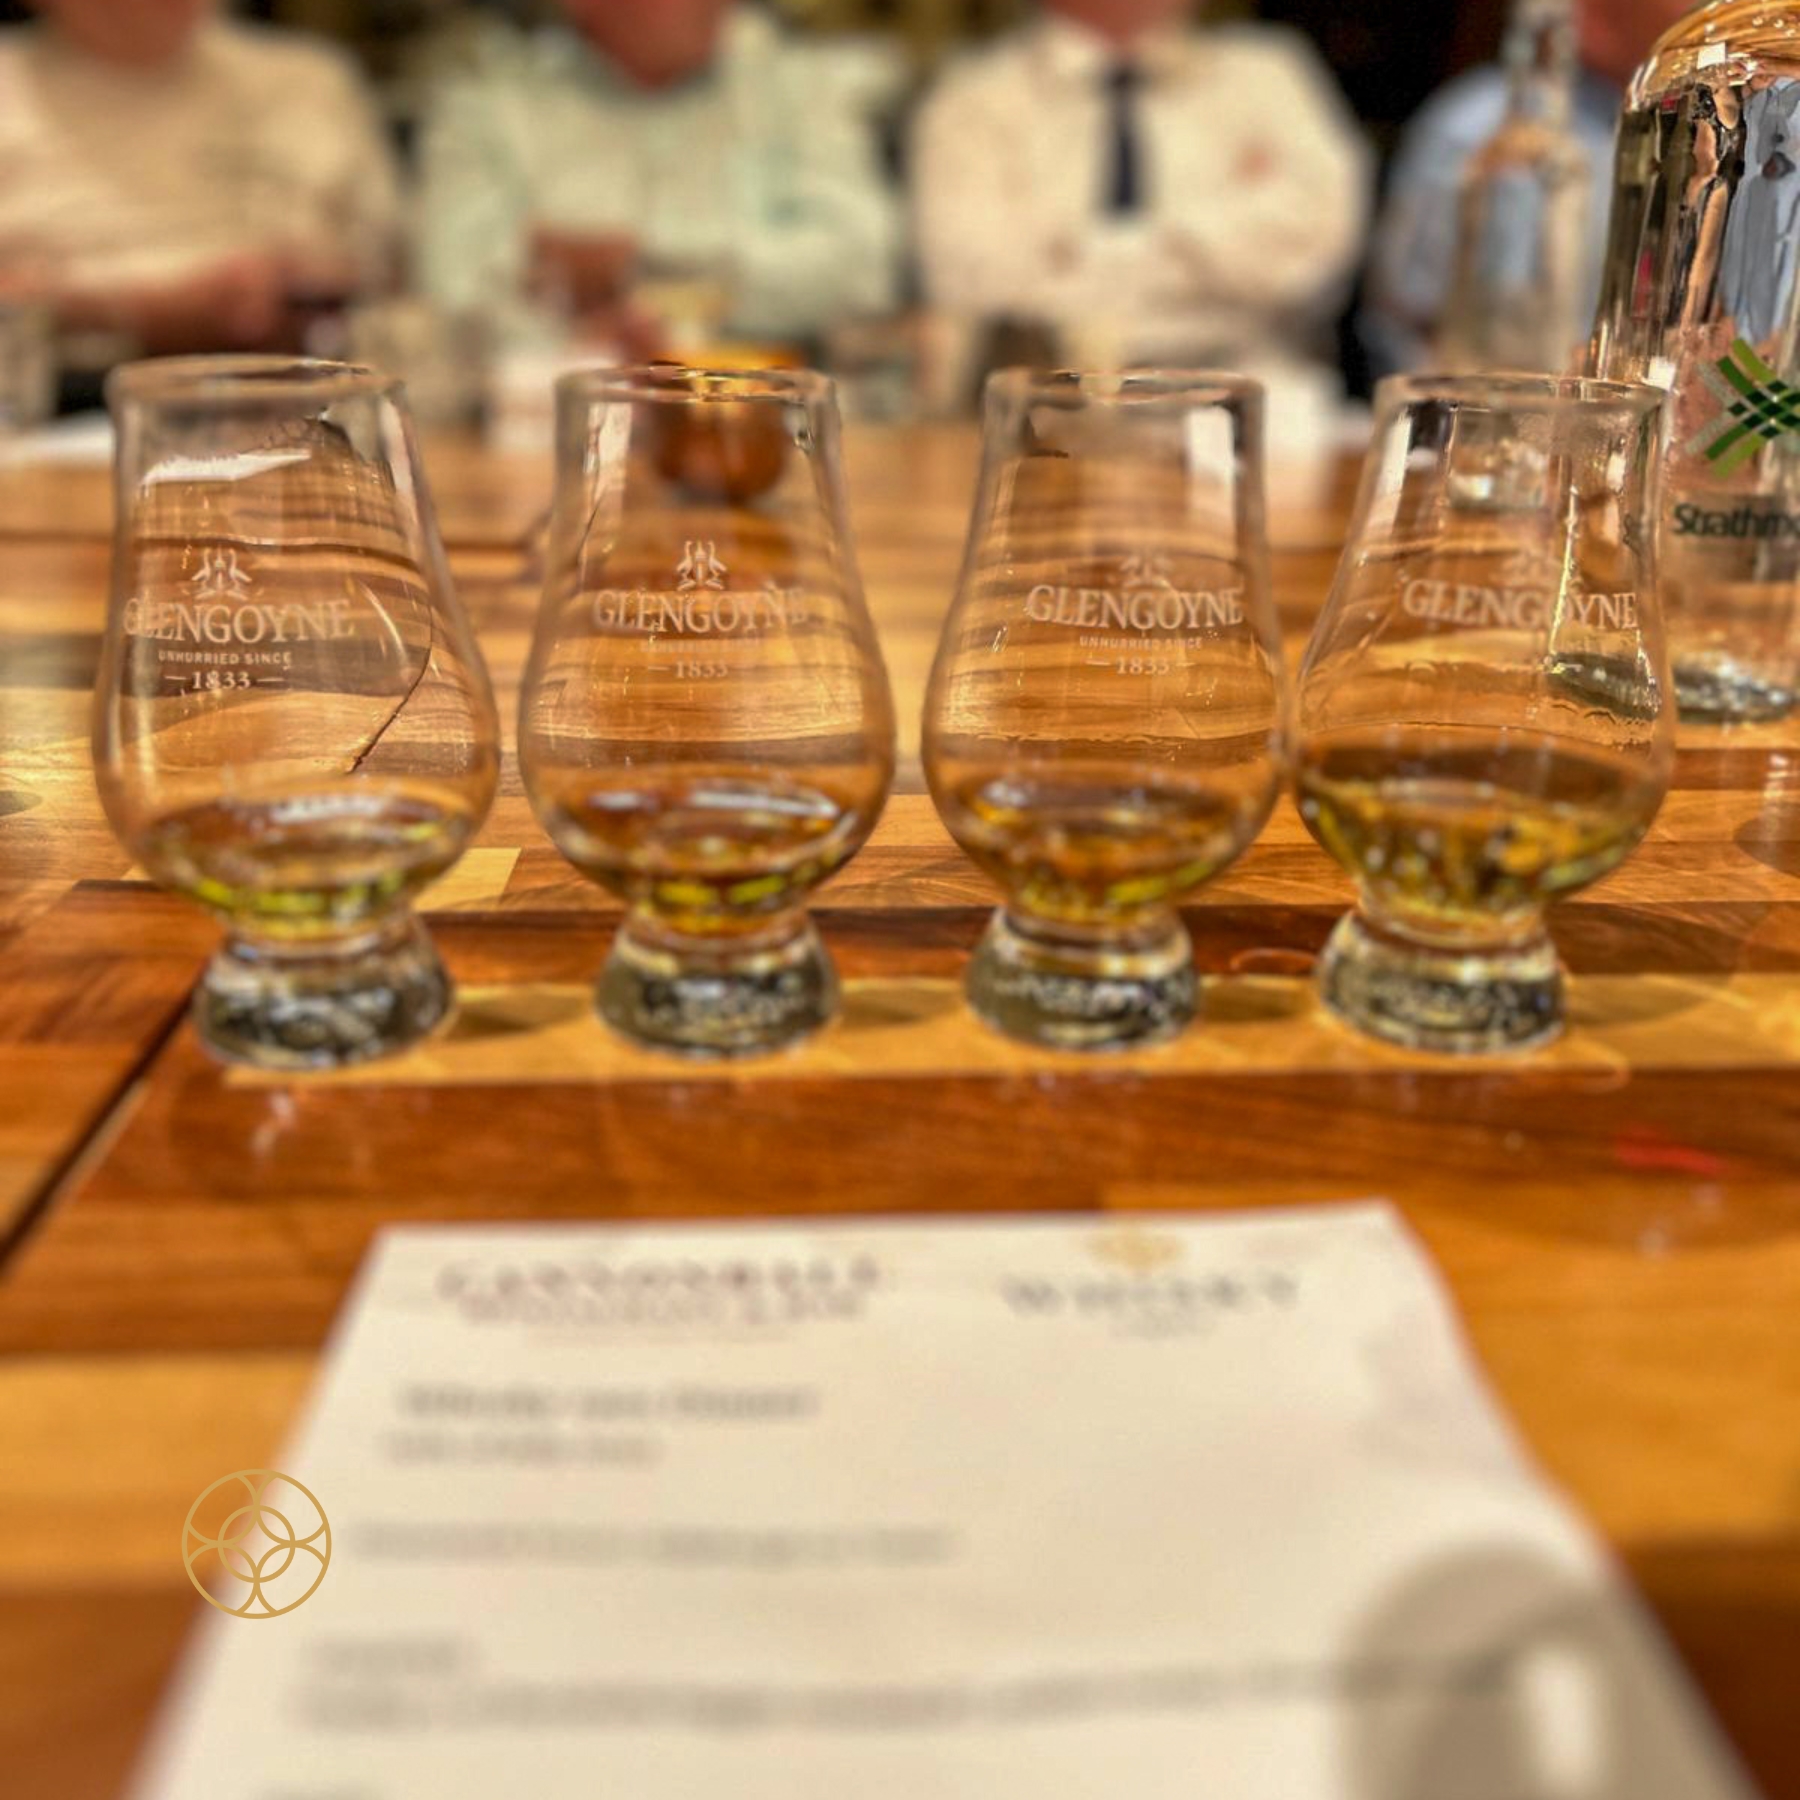 A whisky tasting event at the Cannonball Restaurant in Edinburgh